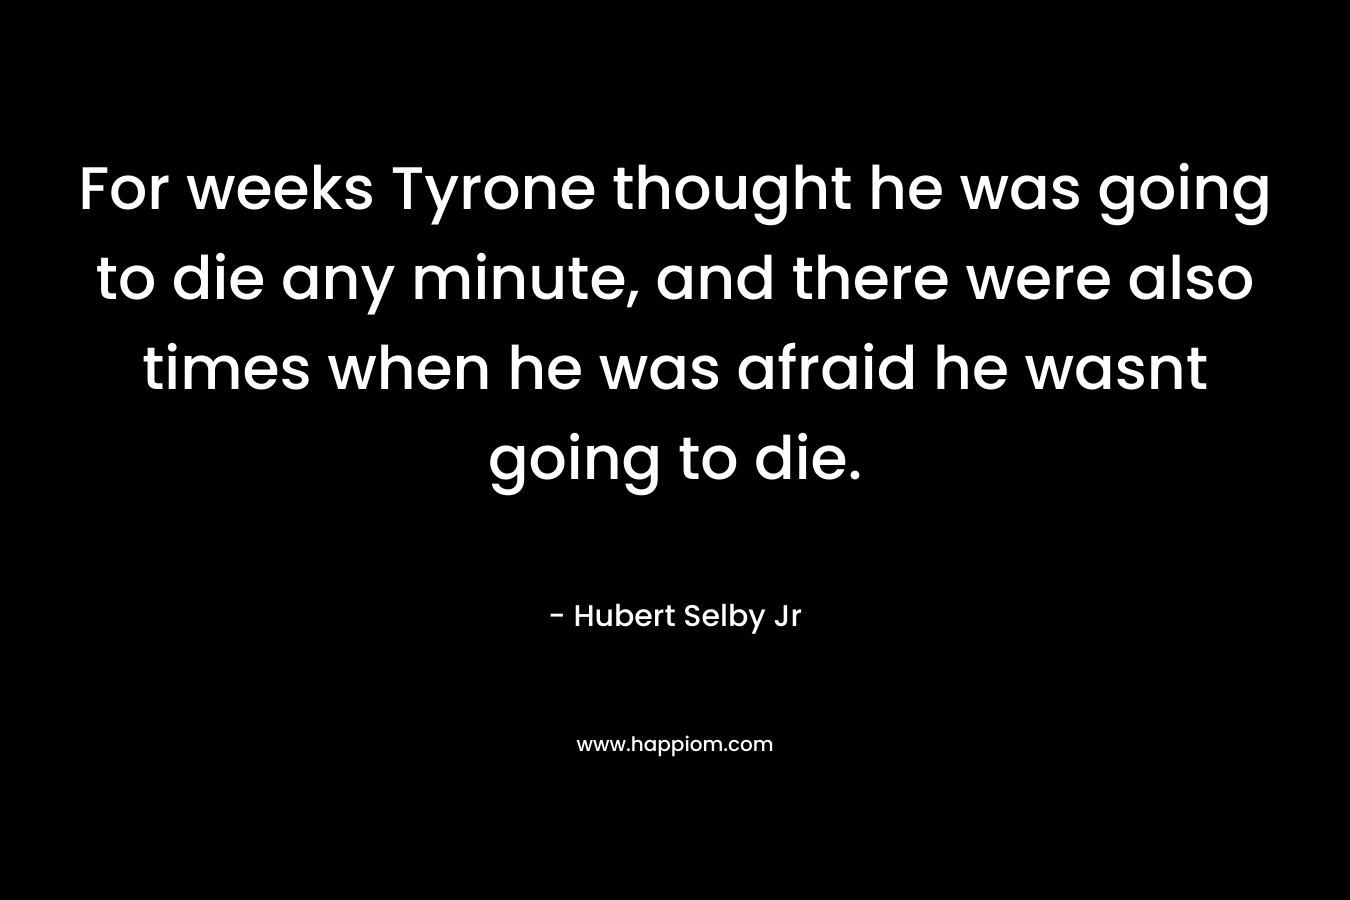 For weeks Tyrone thought he was going to die any minute, and there were also times when he was afraid he wasnt going to die. – Hubert Selby Jr